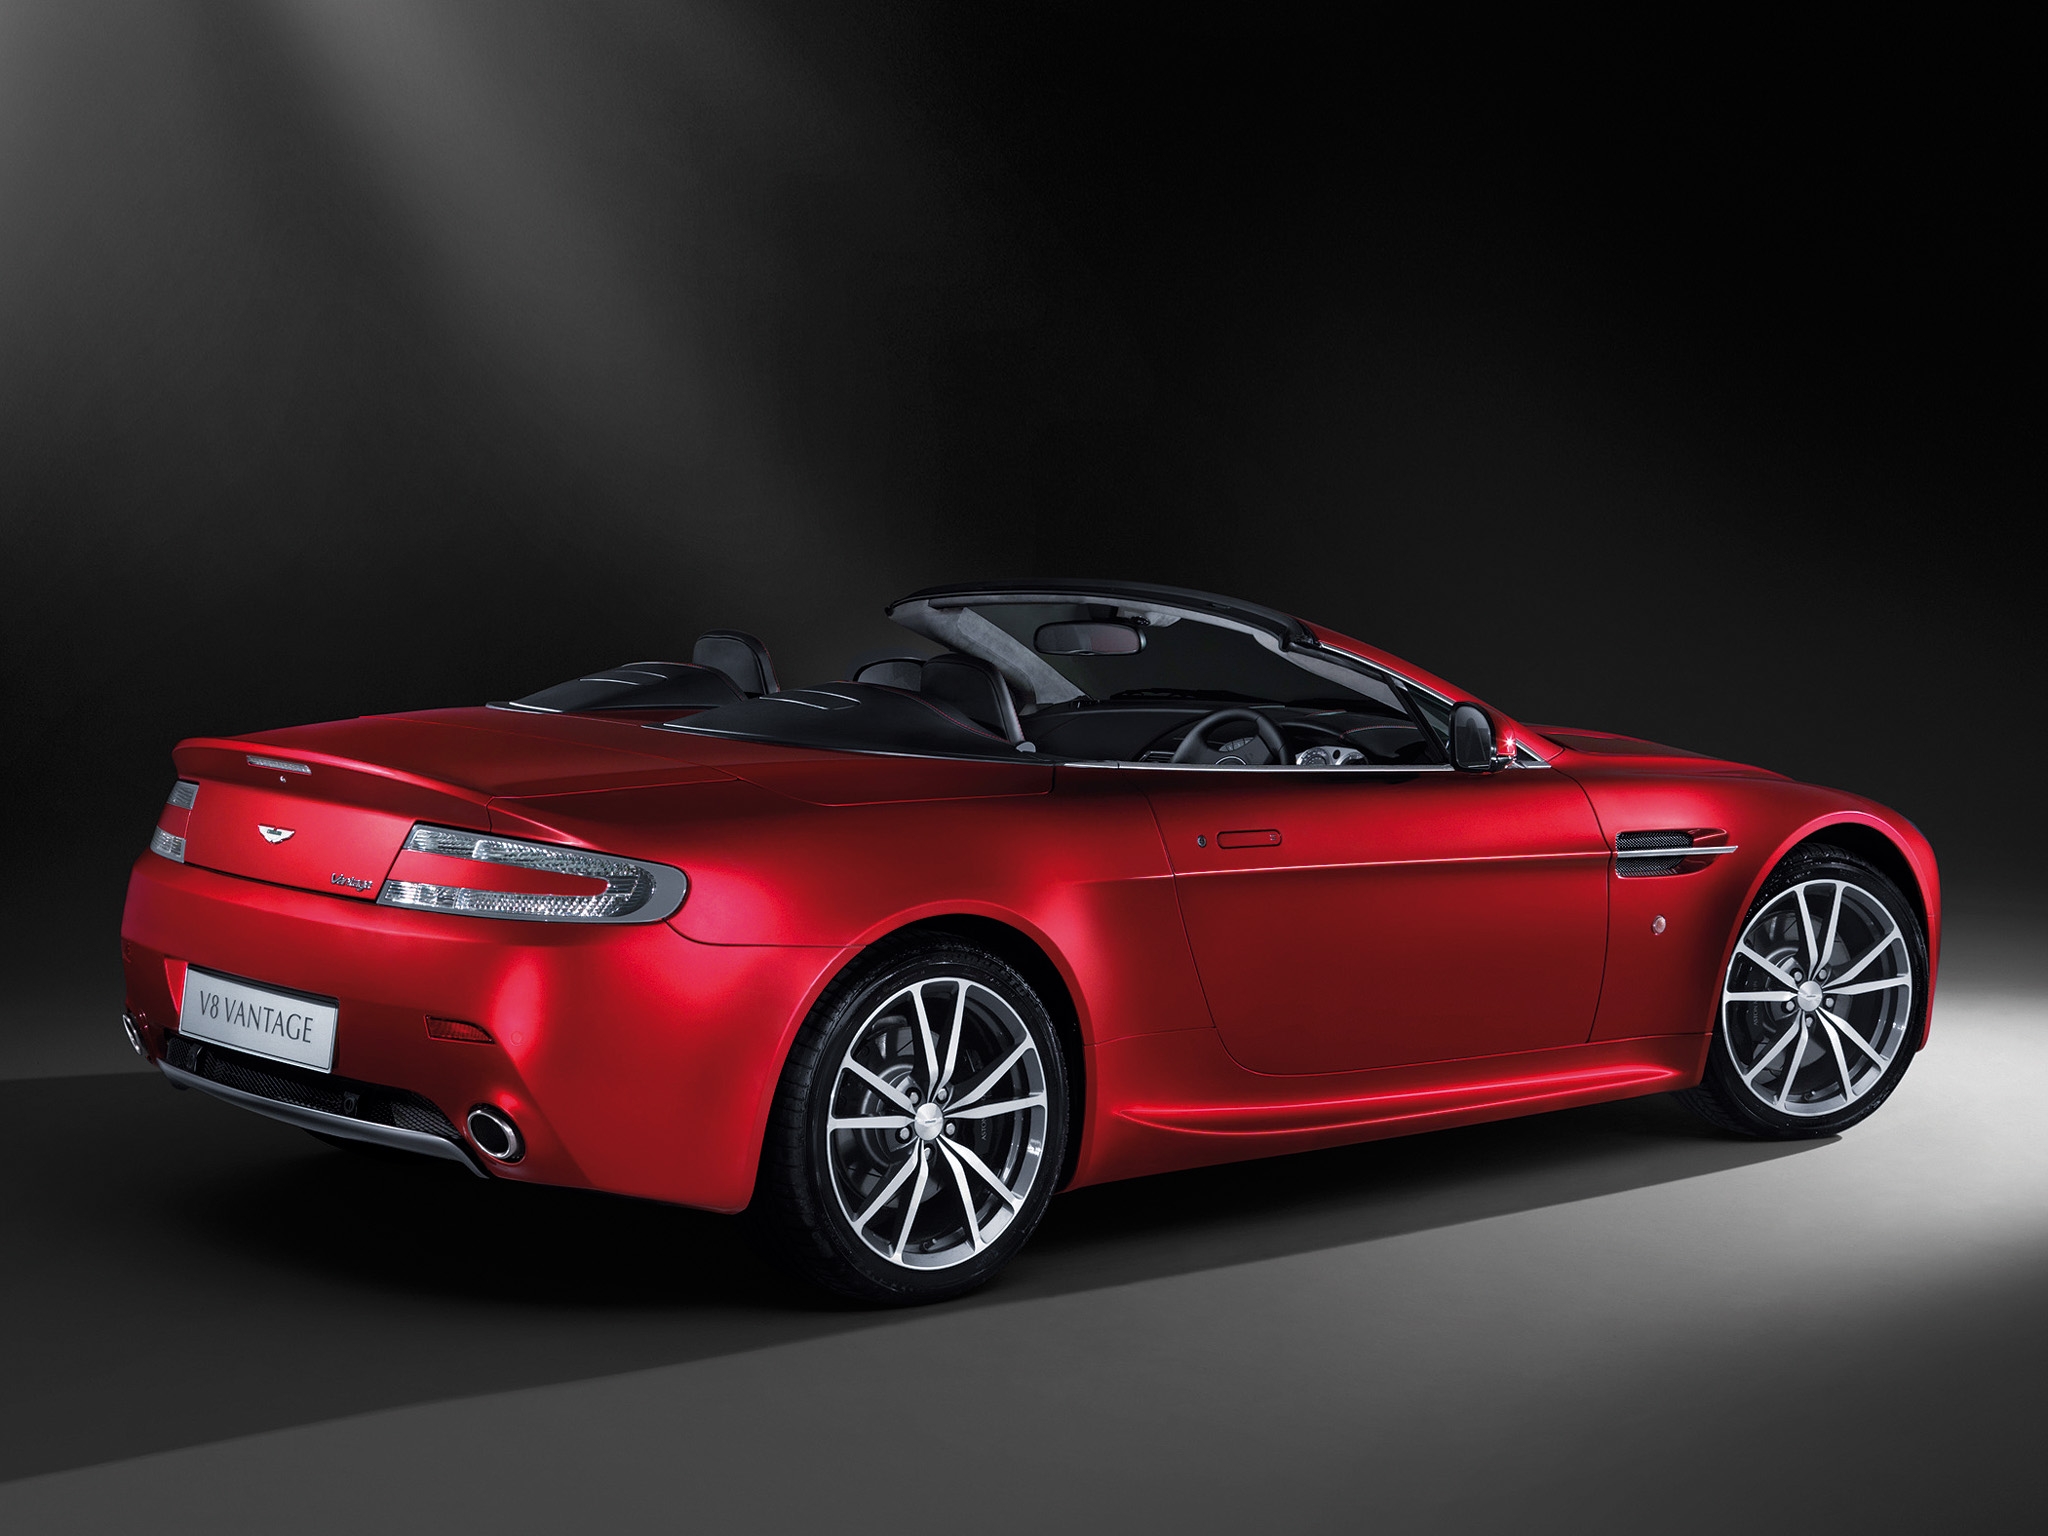 aston martin, cars, red, side view, style, cabriolet, 2008, v8, vantage Full HD